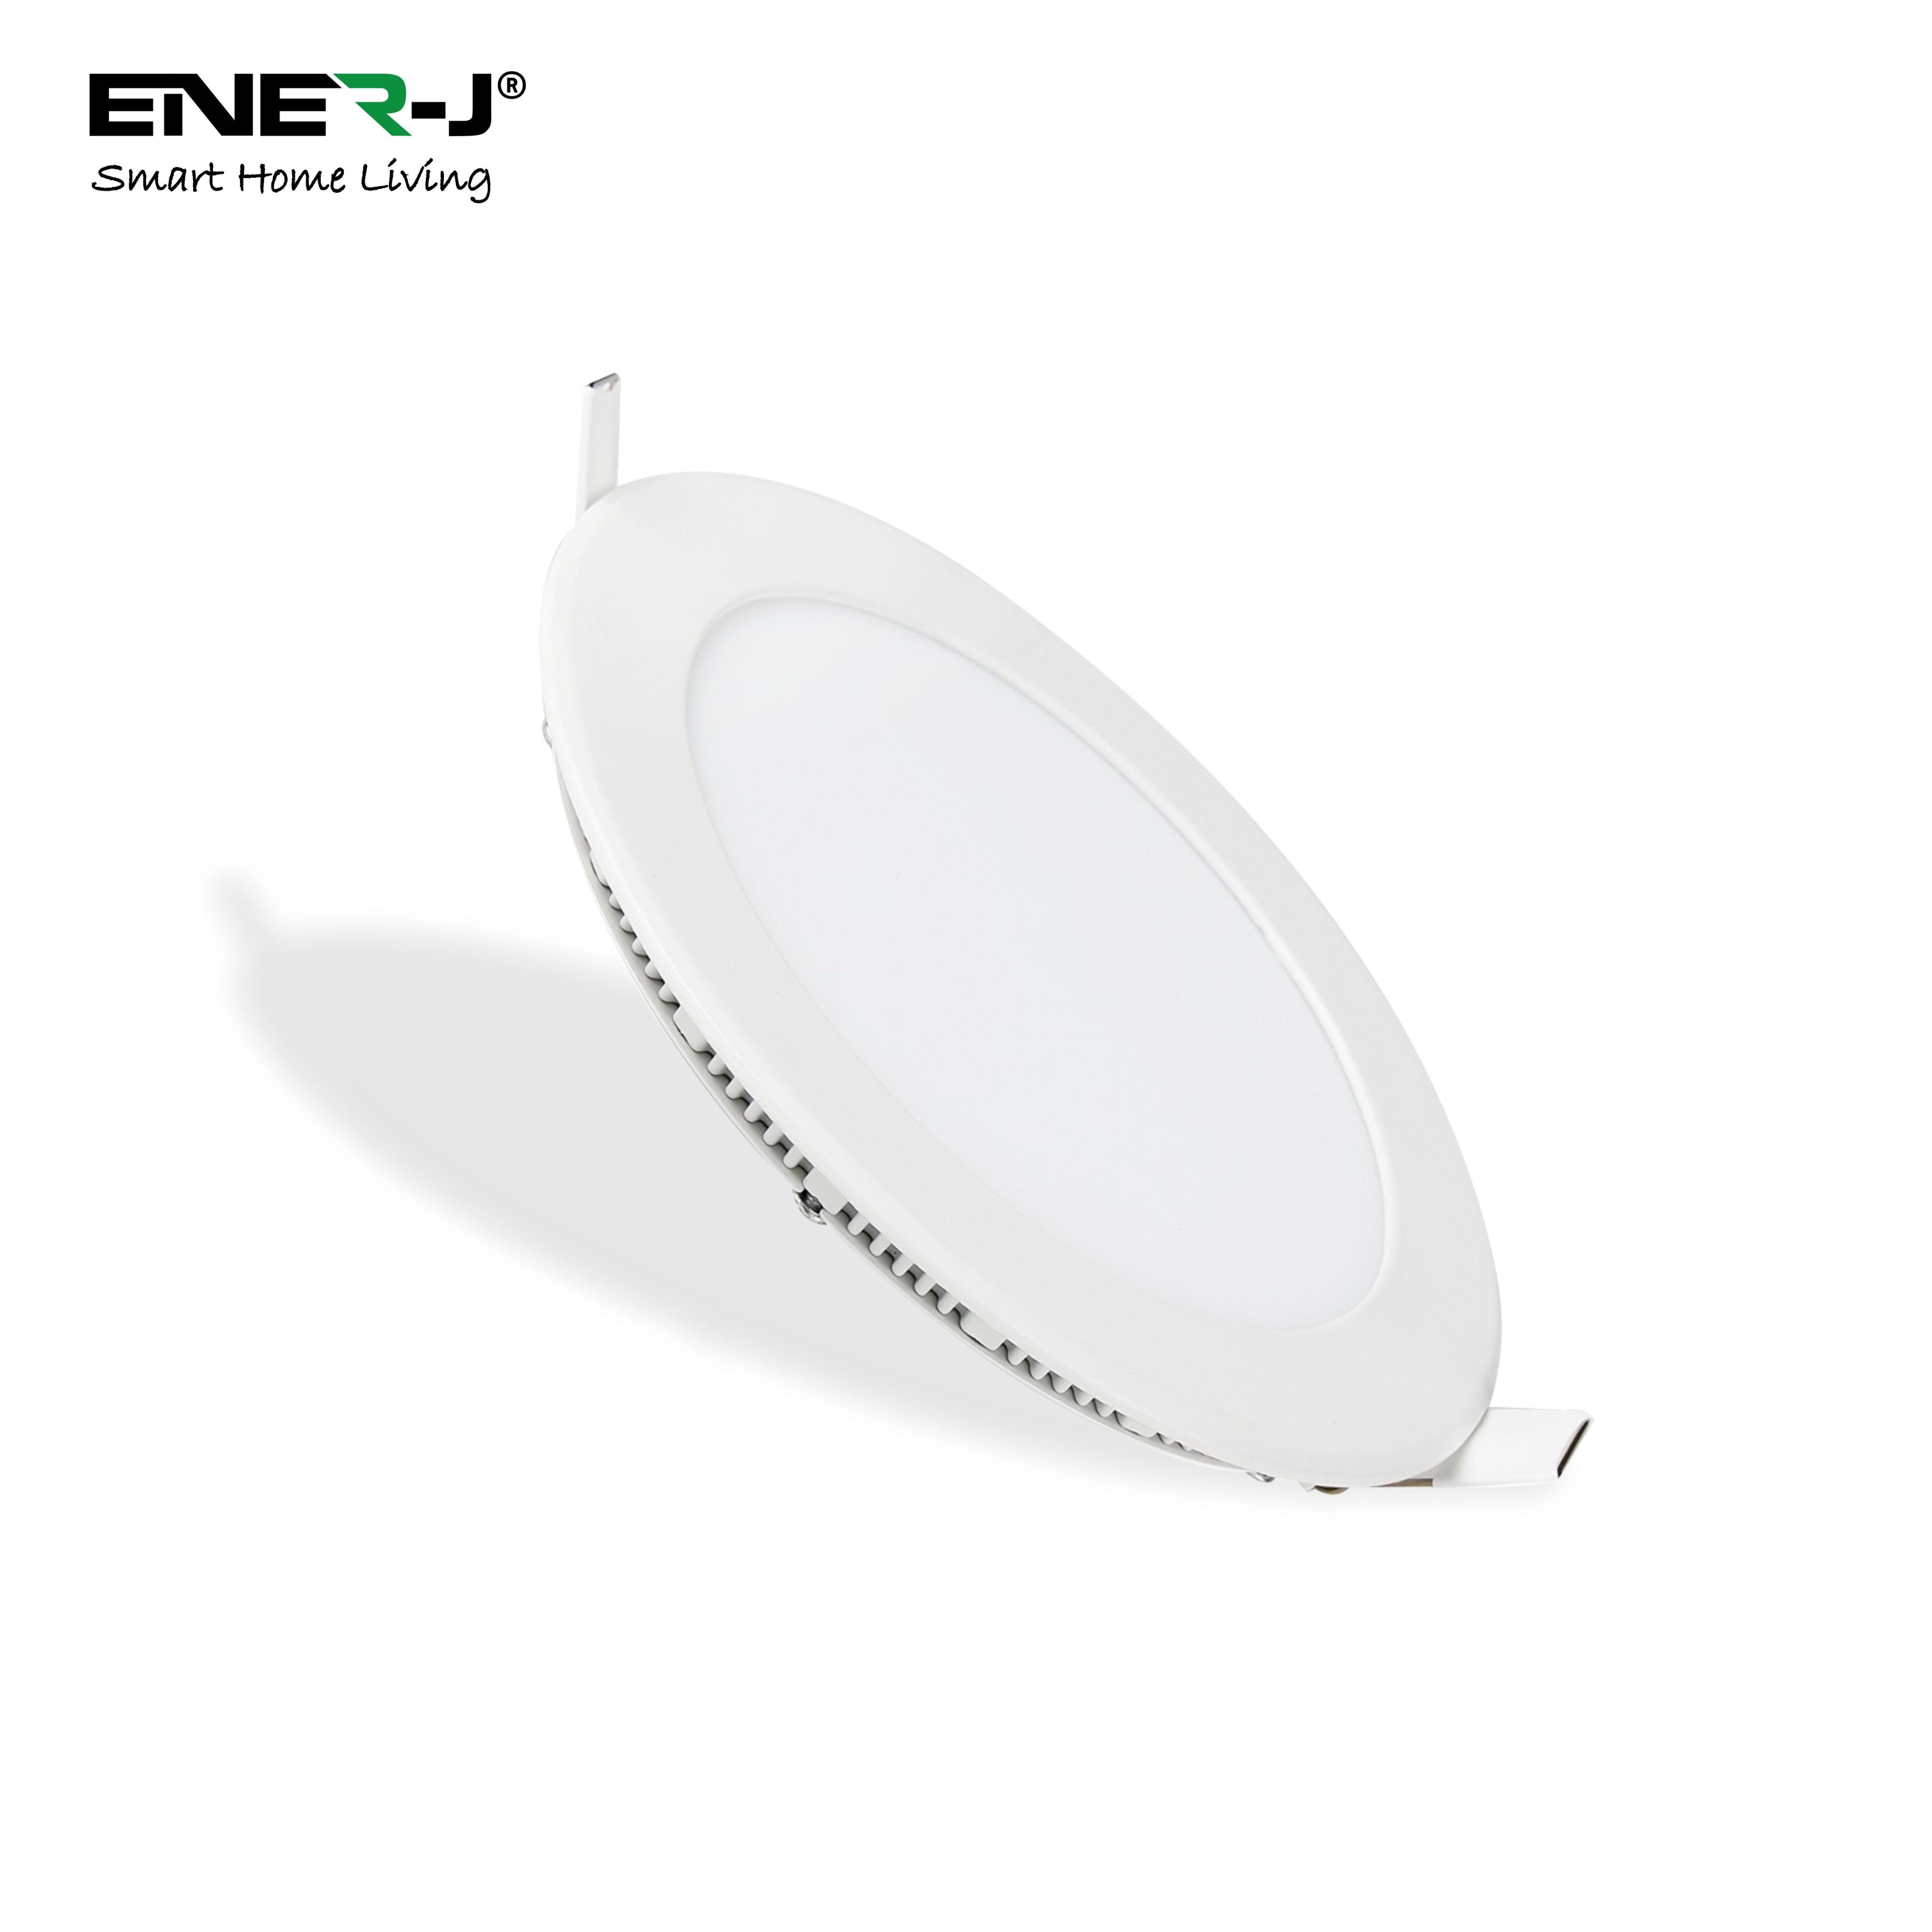 Pack of 4 18W Recessed Round LED Downlight Mini Panel 220mm Diameter, 205mm Hole Size, CE Driver, 4000K, 20000 Hours Long Life